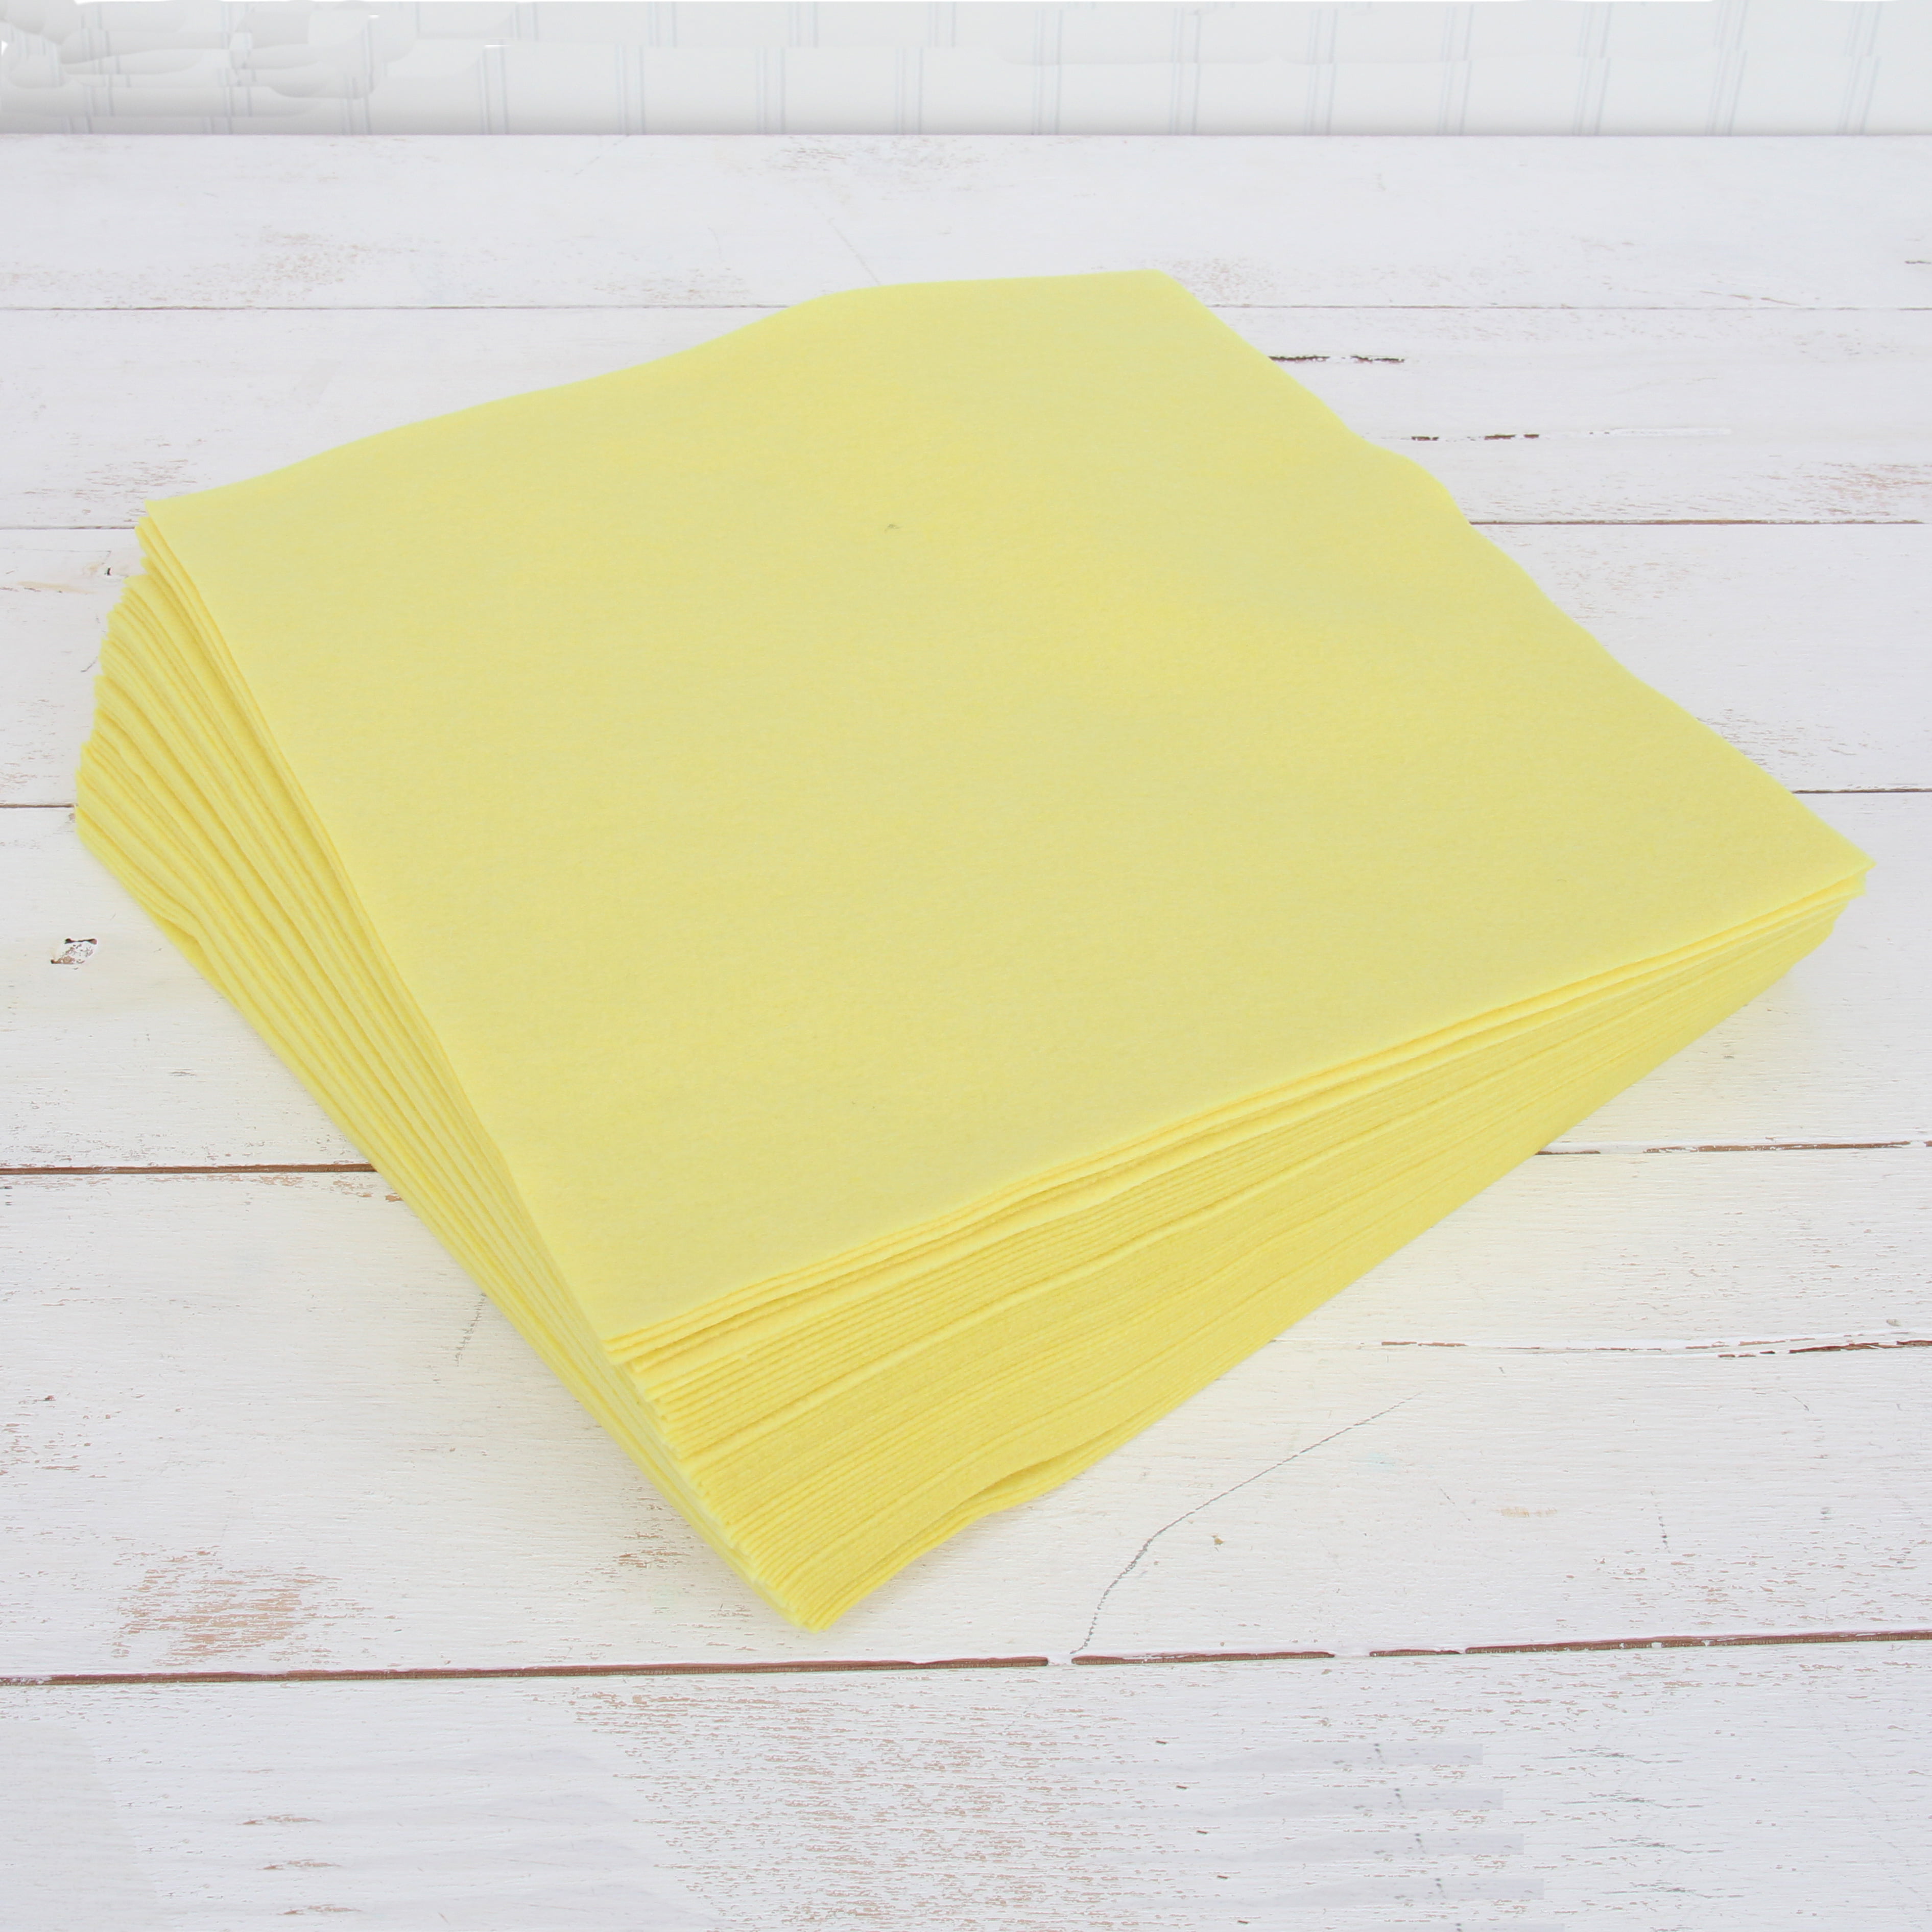 Threadart Premium Felt Sheets - 50 Sheets - 12 x 12 - Light Yellow | Soft  Wool-Like Feel | 1.2mm Thick for DIY Crafts, Sewing, Crafting Projects 